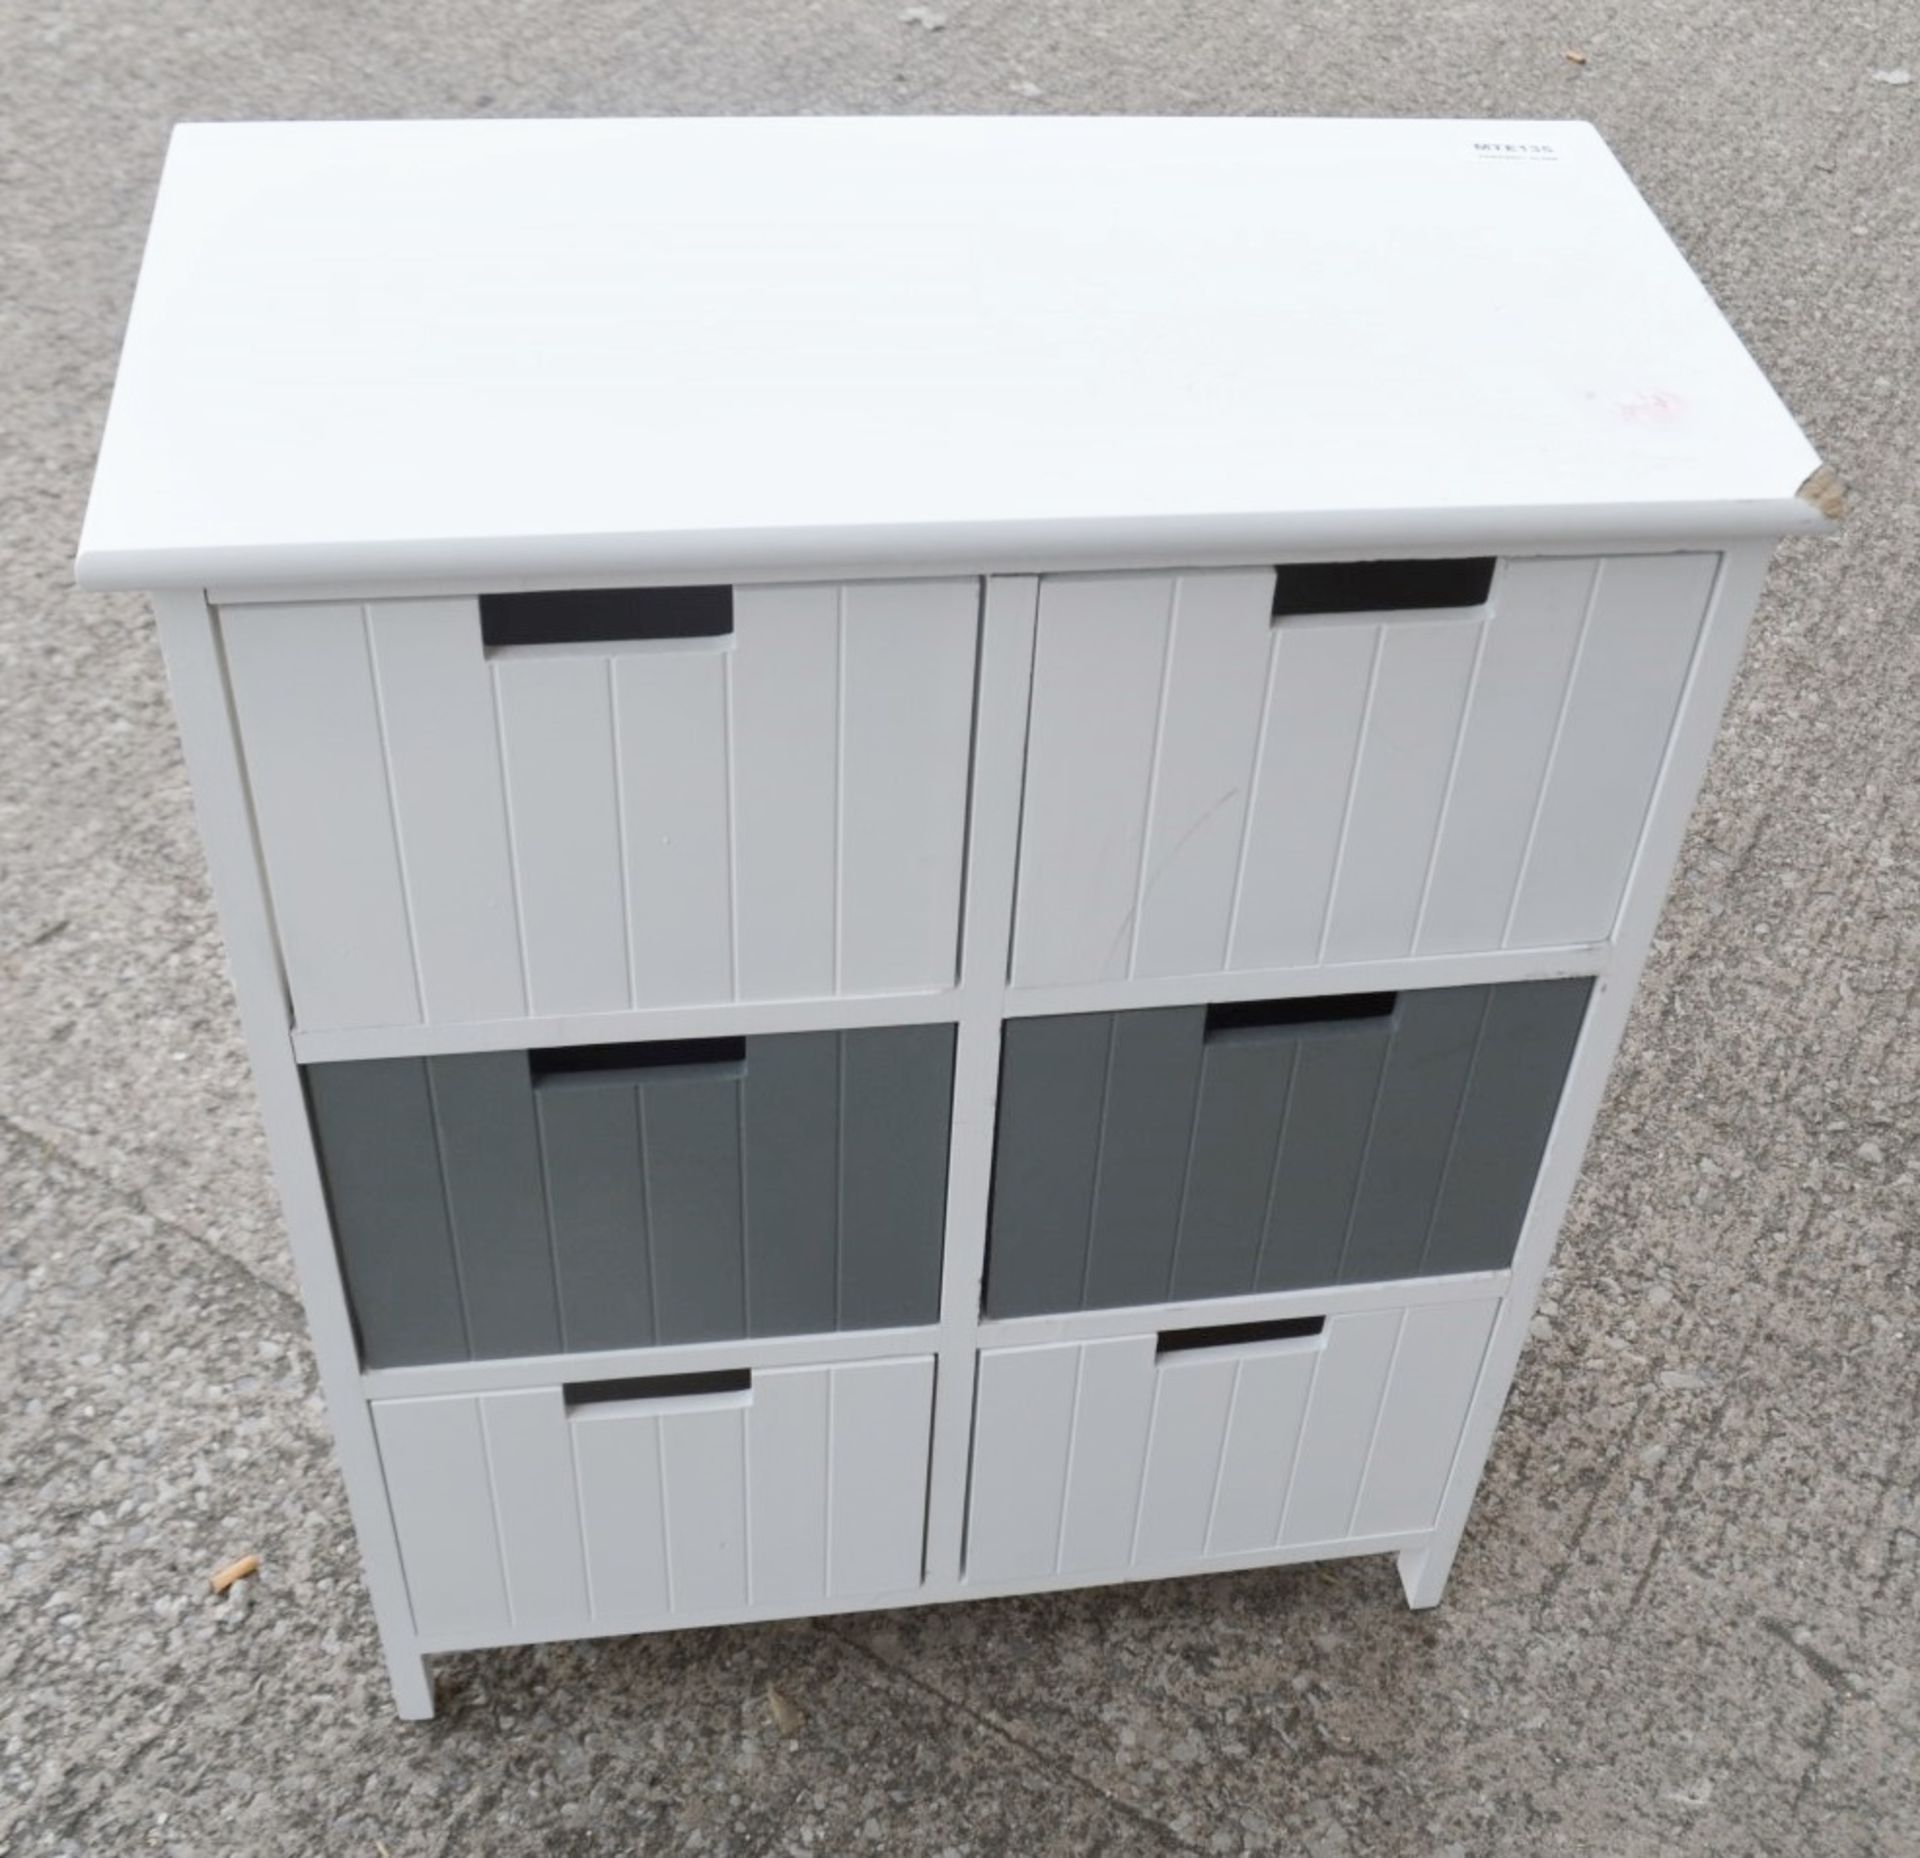 2 x Storage Cupboards In White - Preowned, From An Exclusive Property - Dimensions Vary - No VAT